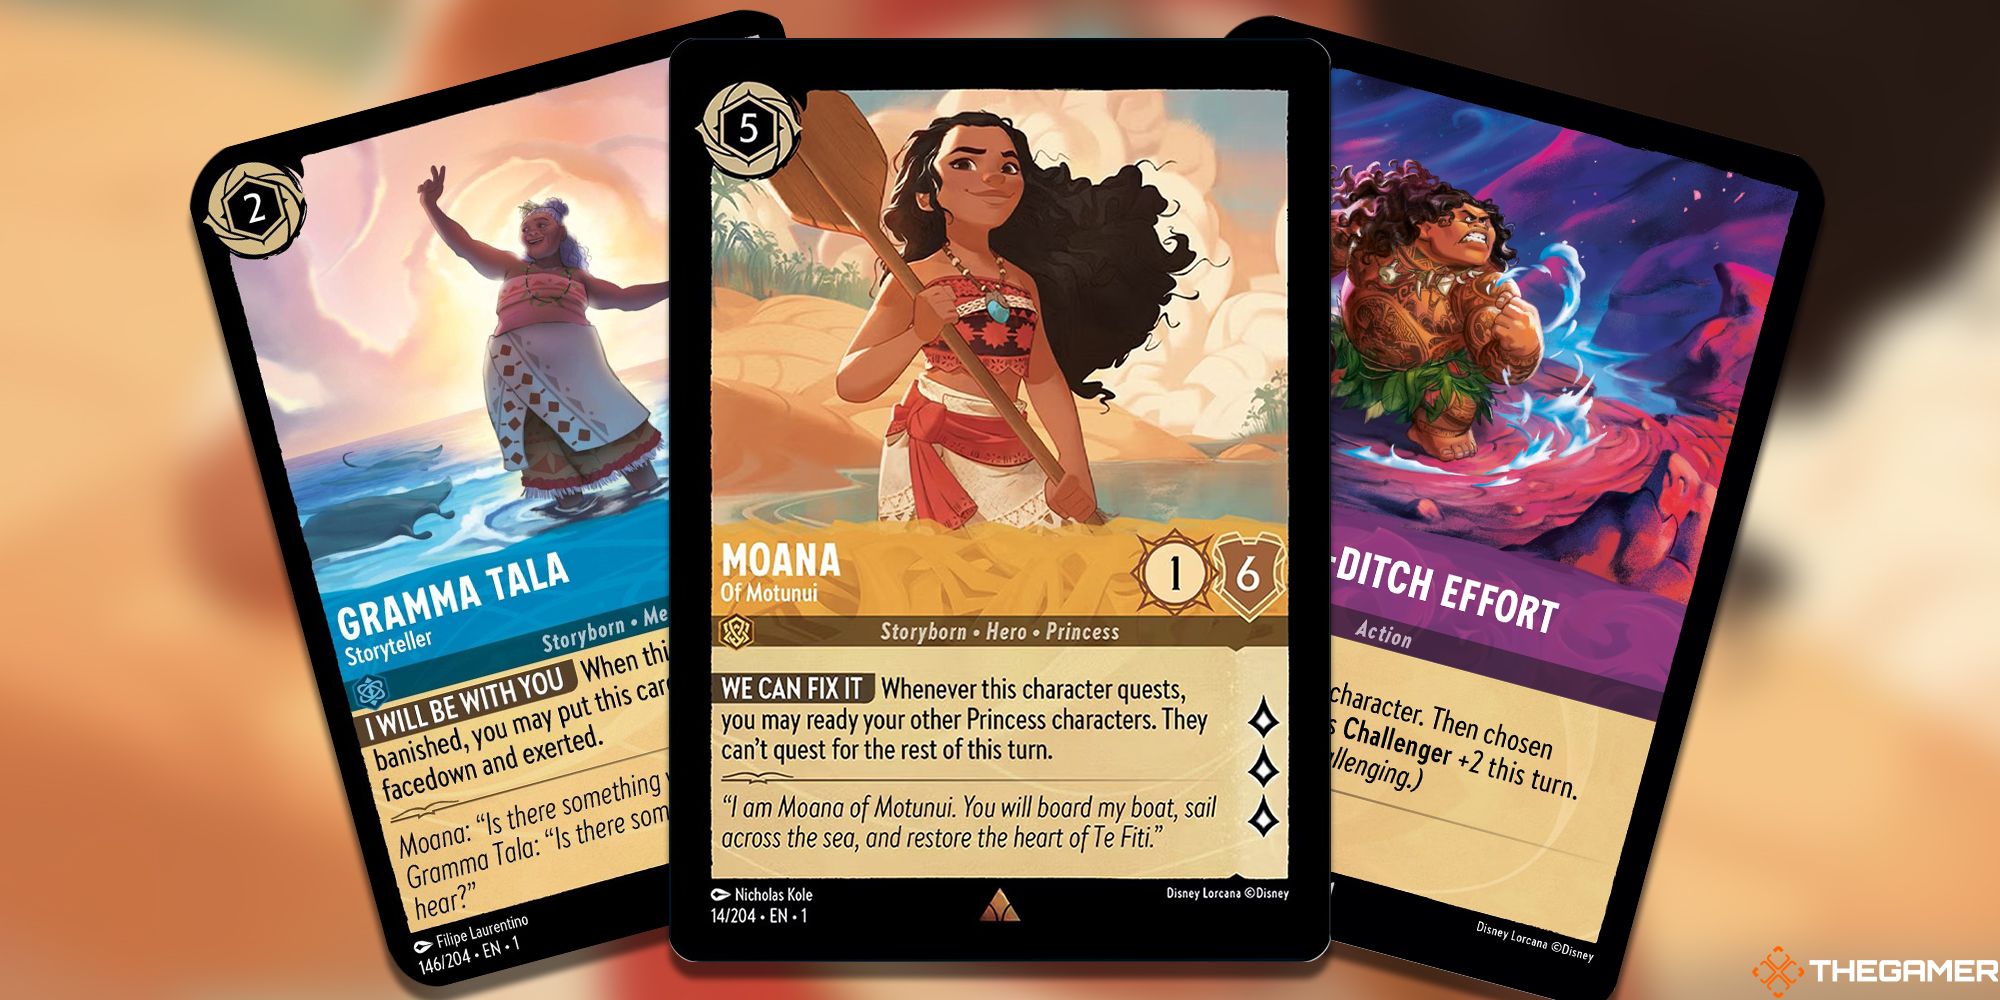 Gramma Tala, Story Teller, Moana, Of Motunui, and Last Ditch Effort Lorcana Cards over a blurred background